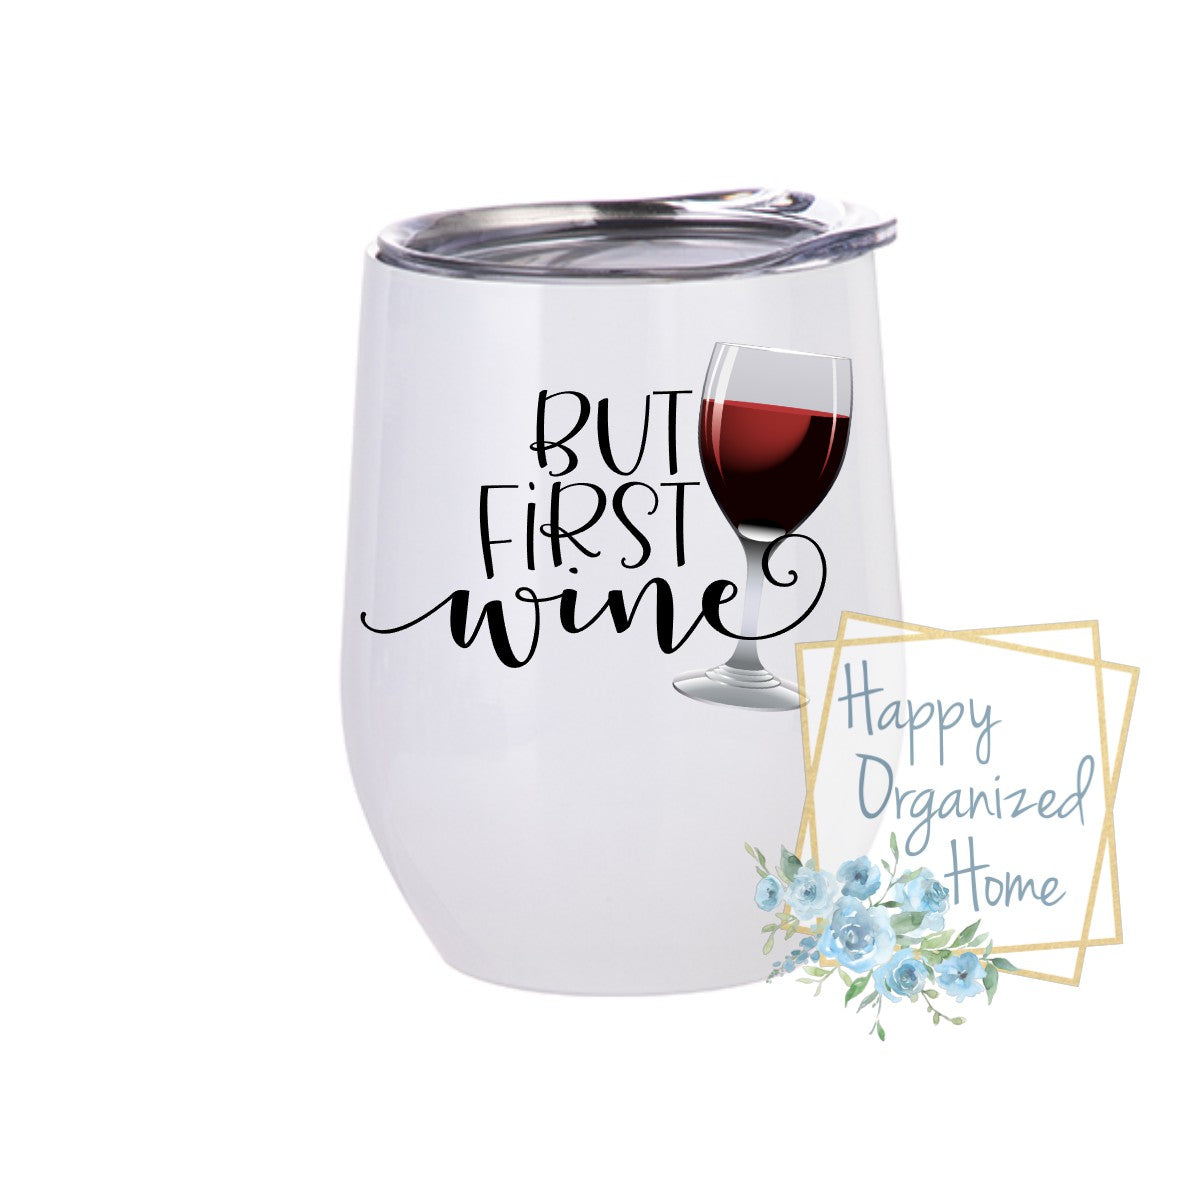 BUT FIRST wine - Insulated Wine Tumbler